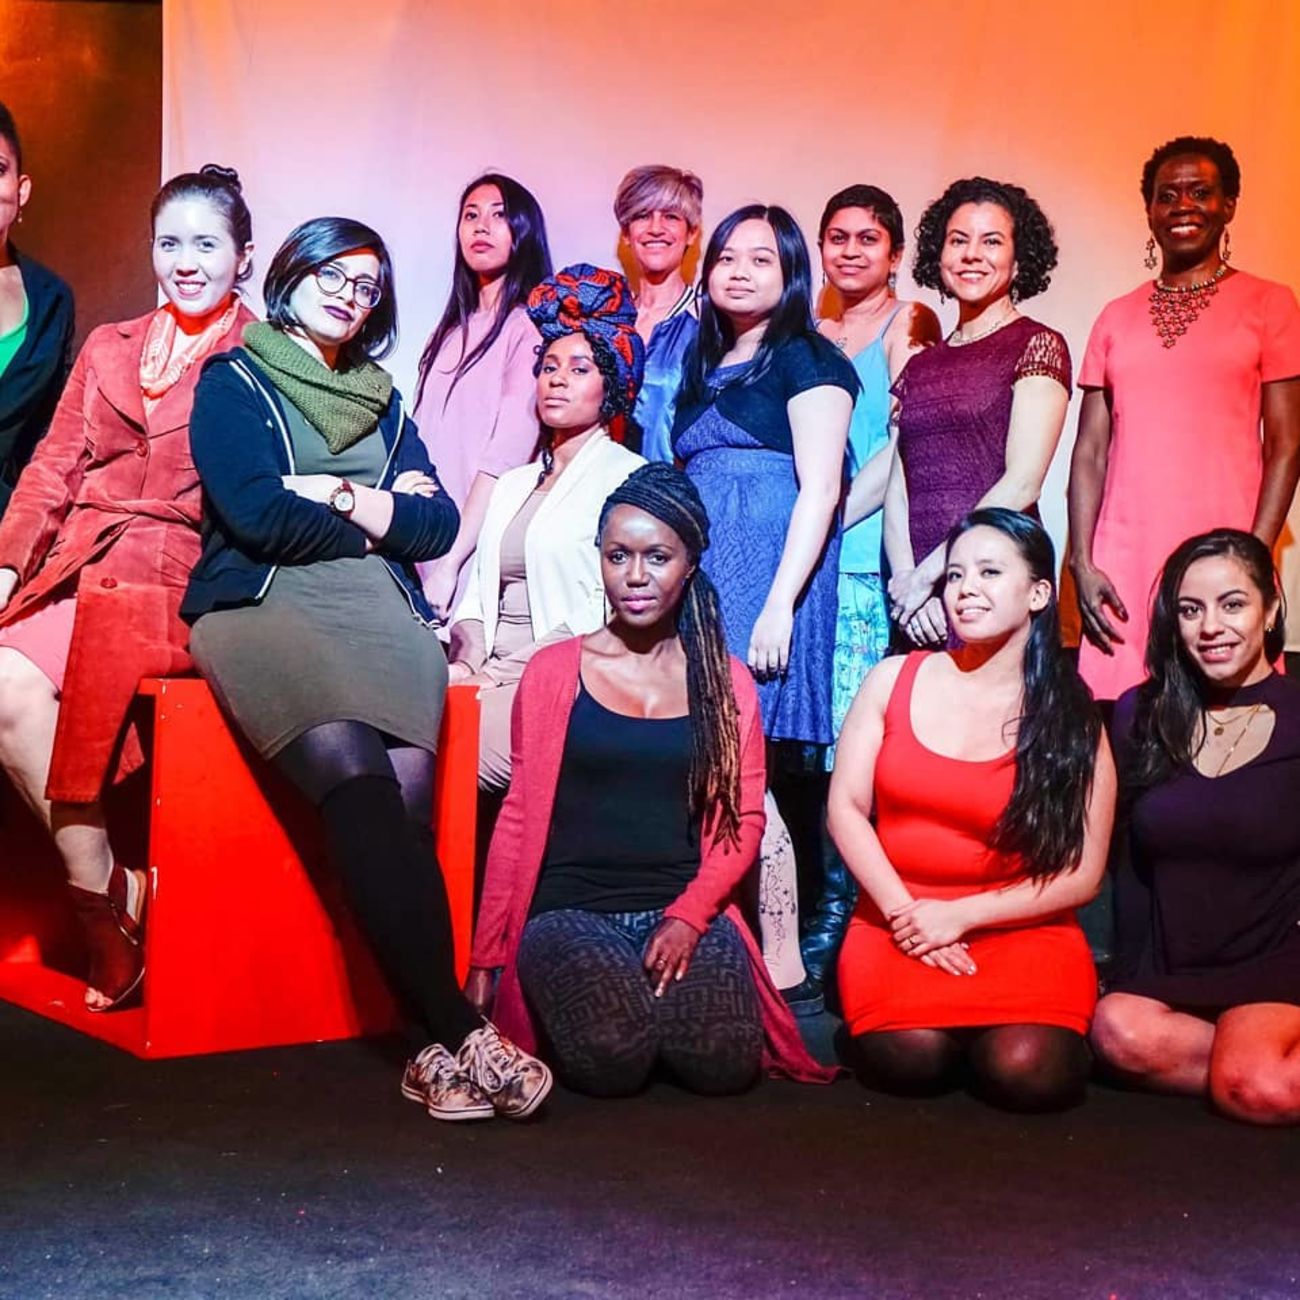 Enhance Your Culture of DEI with an Interactive Creative Workshop Led by Women Artists of Color